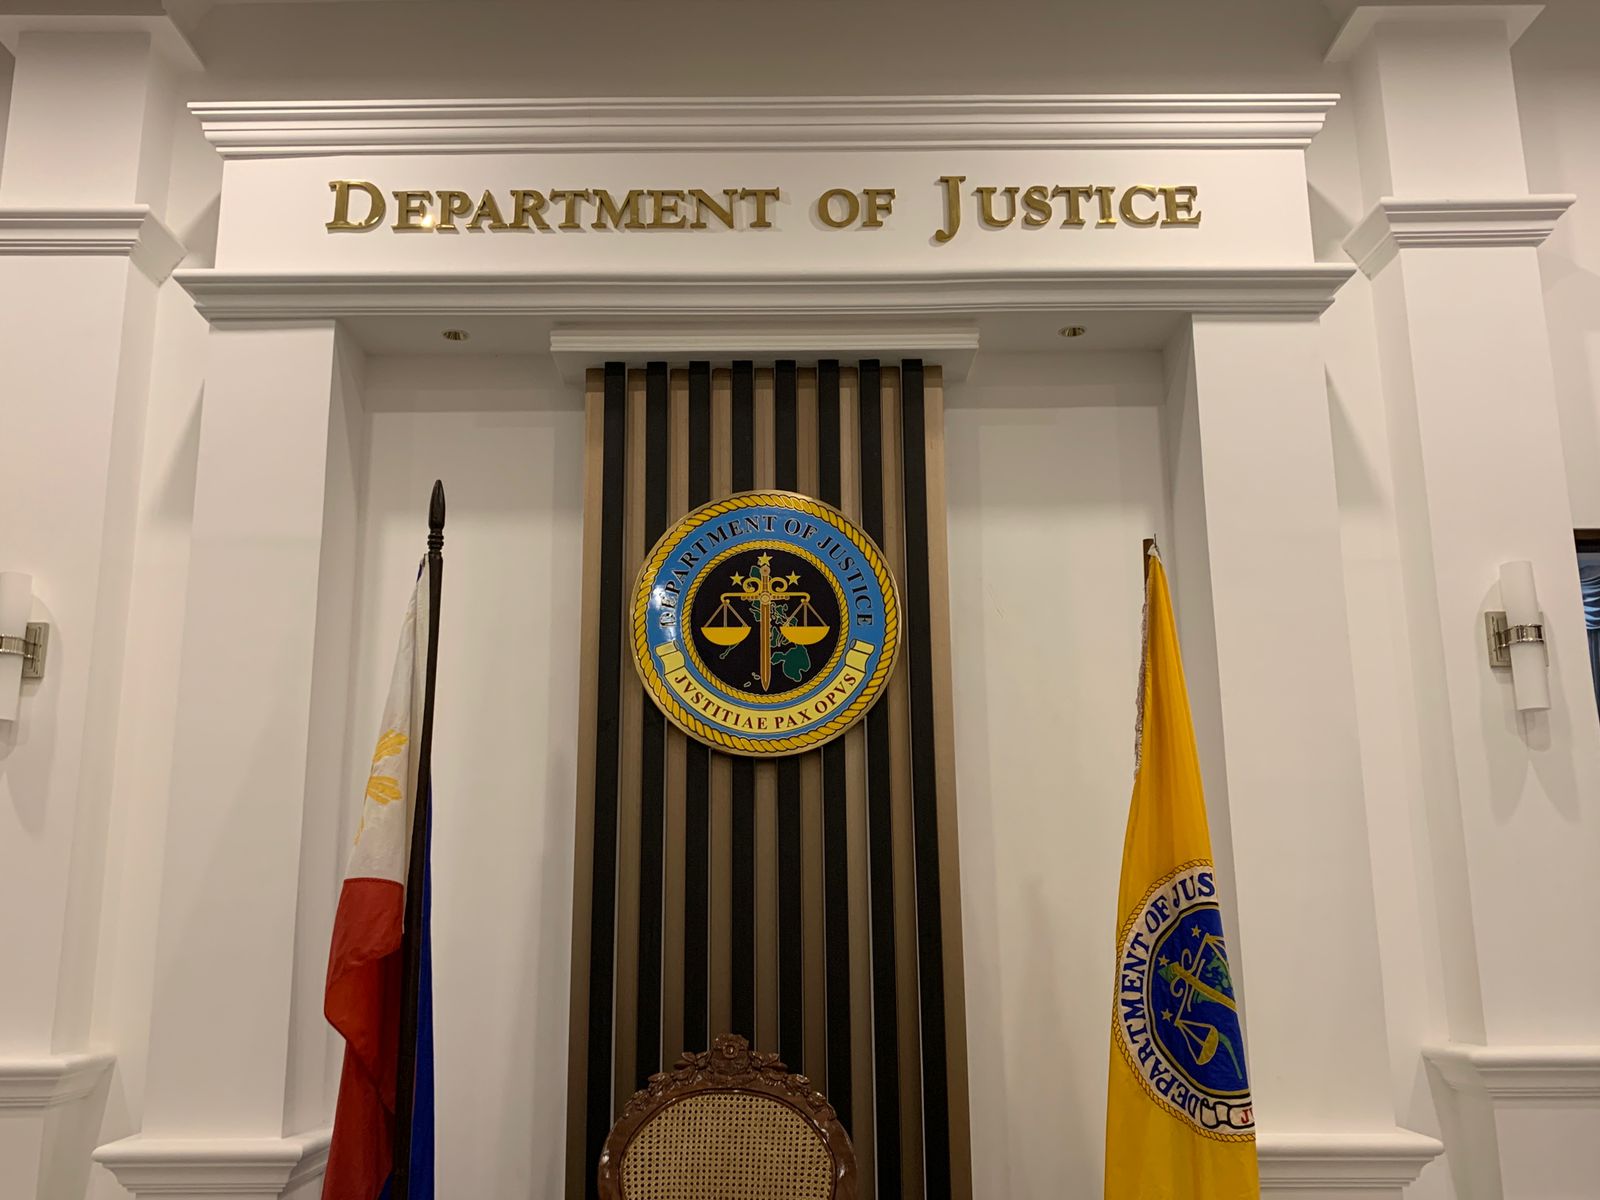 The wife of slain labor leader Emmanuel "Manny" Asuncion on Thursday asked the Department of Justice (DOJ) to reconsider its resolution dismissing the murder case against 17 policemen tagged in her husband's death.